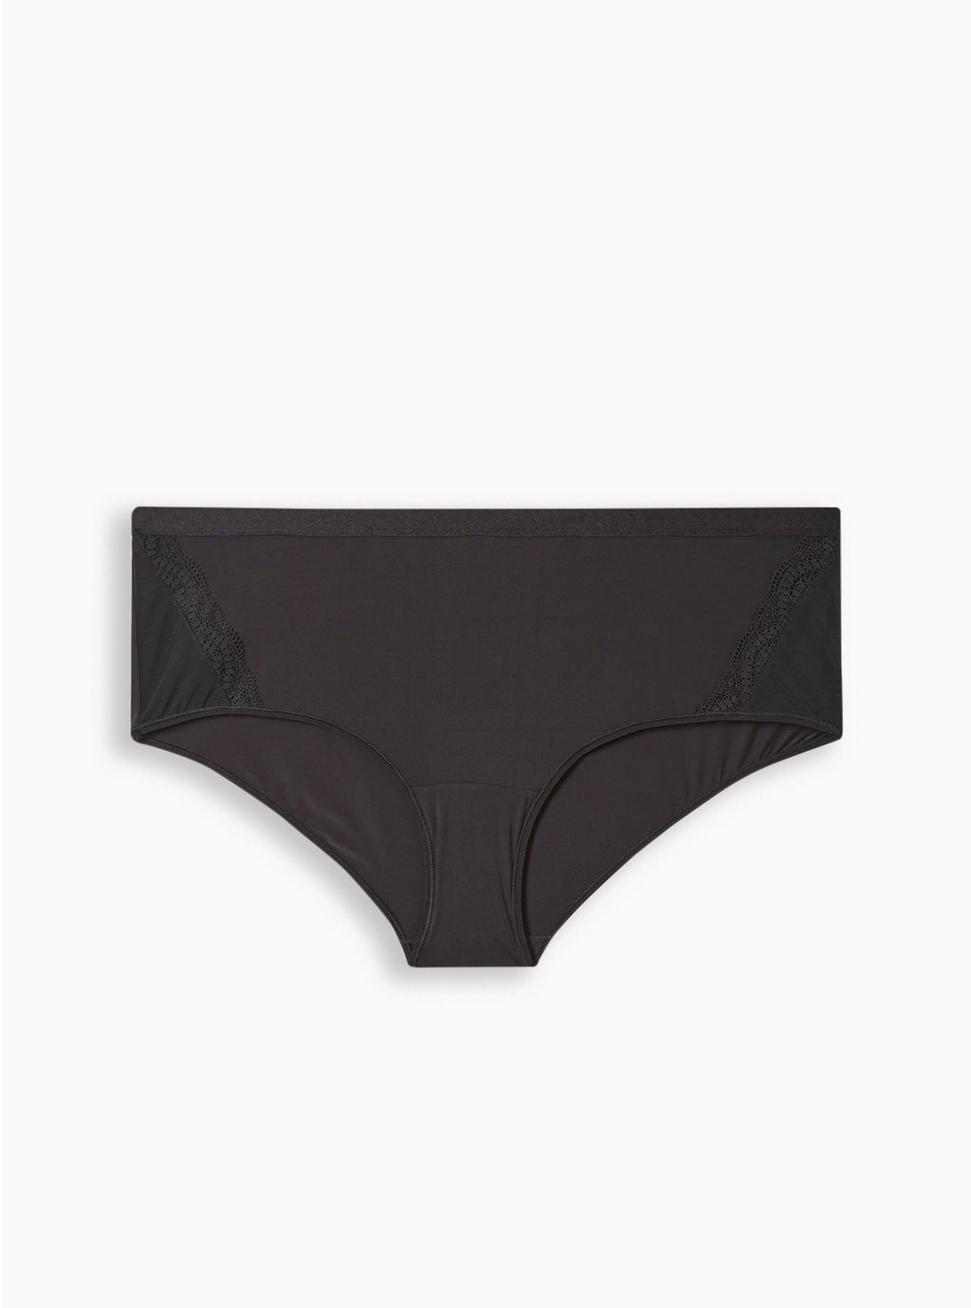 Second Skin Mid-Rise Cheeky Panty, RICH BLACK, hi-res